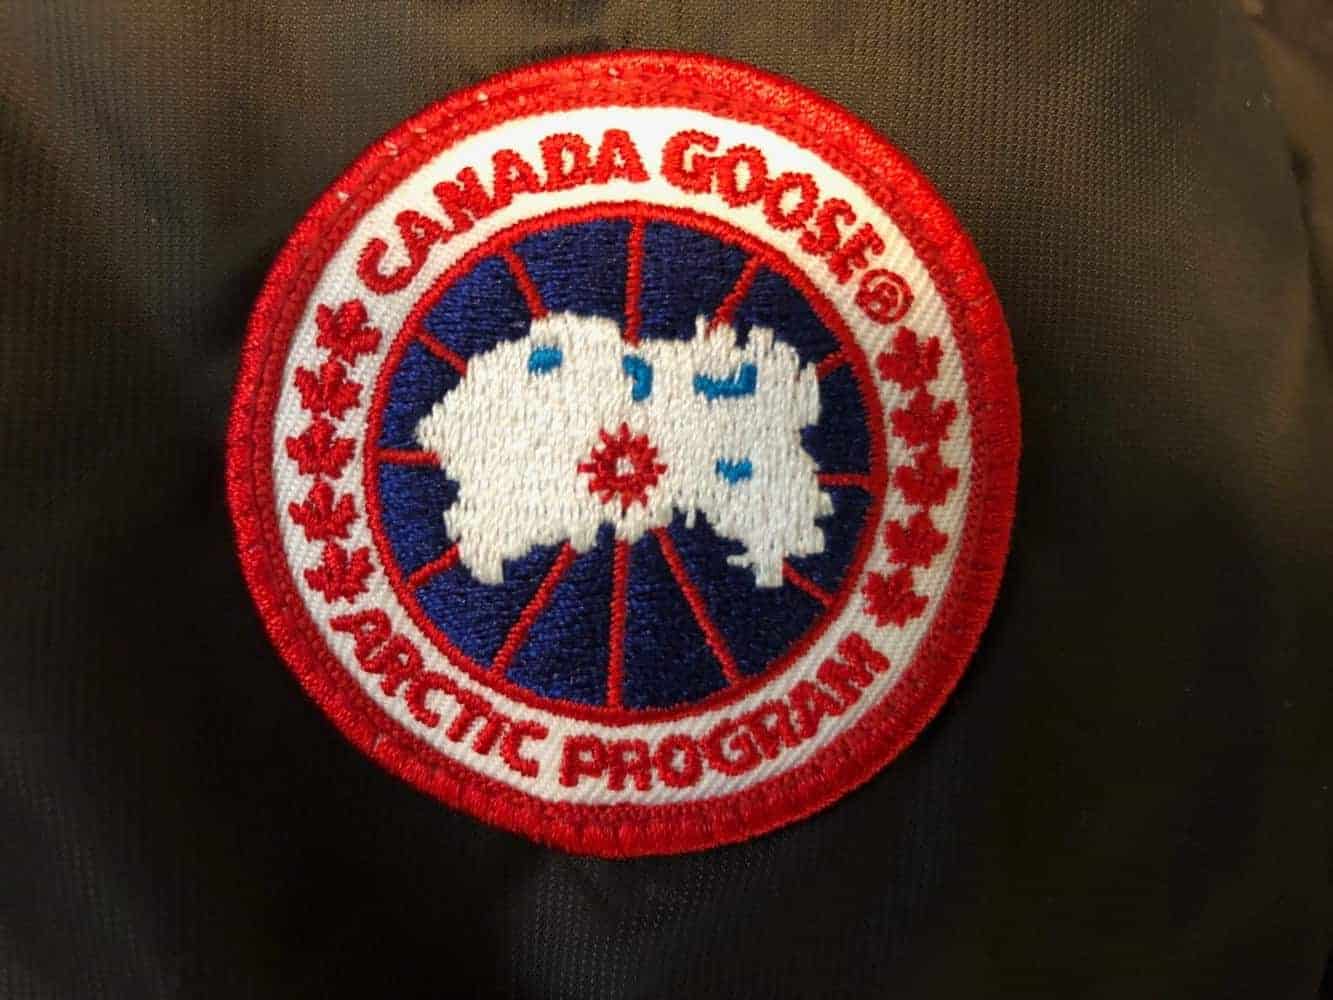 A look at the Canada Goose badge logo on a jacket.